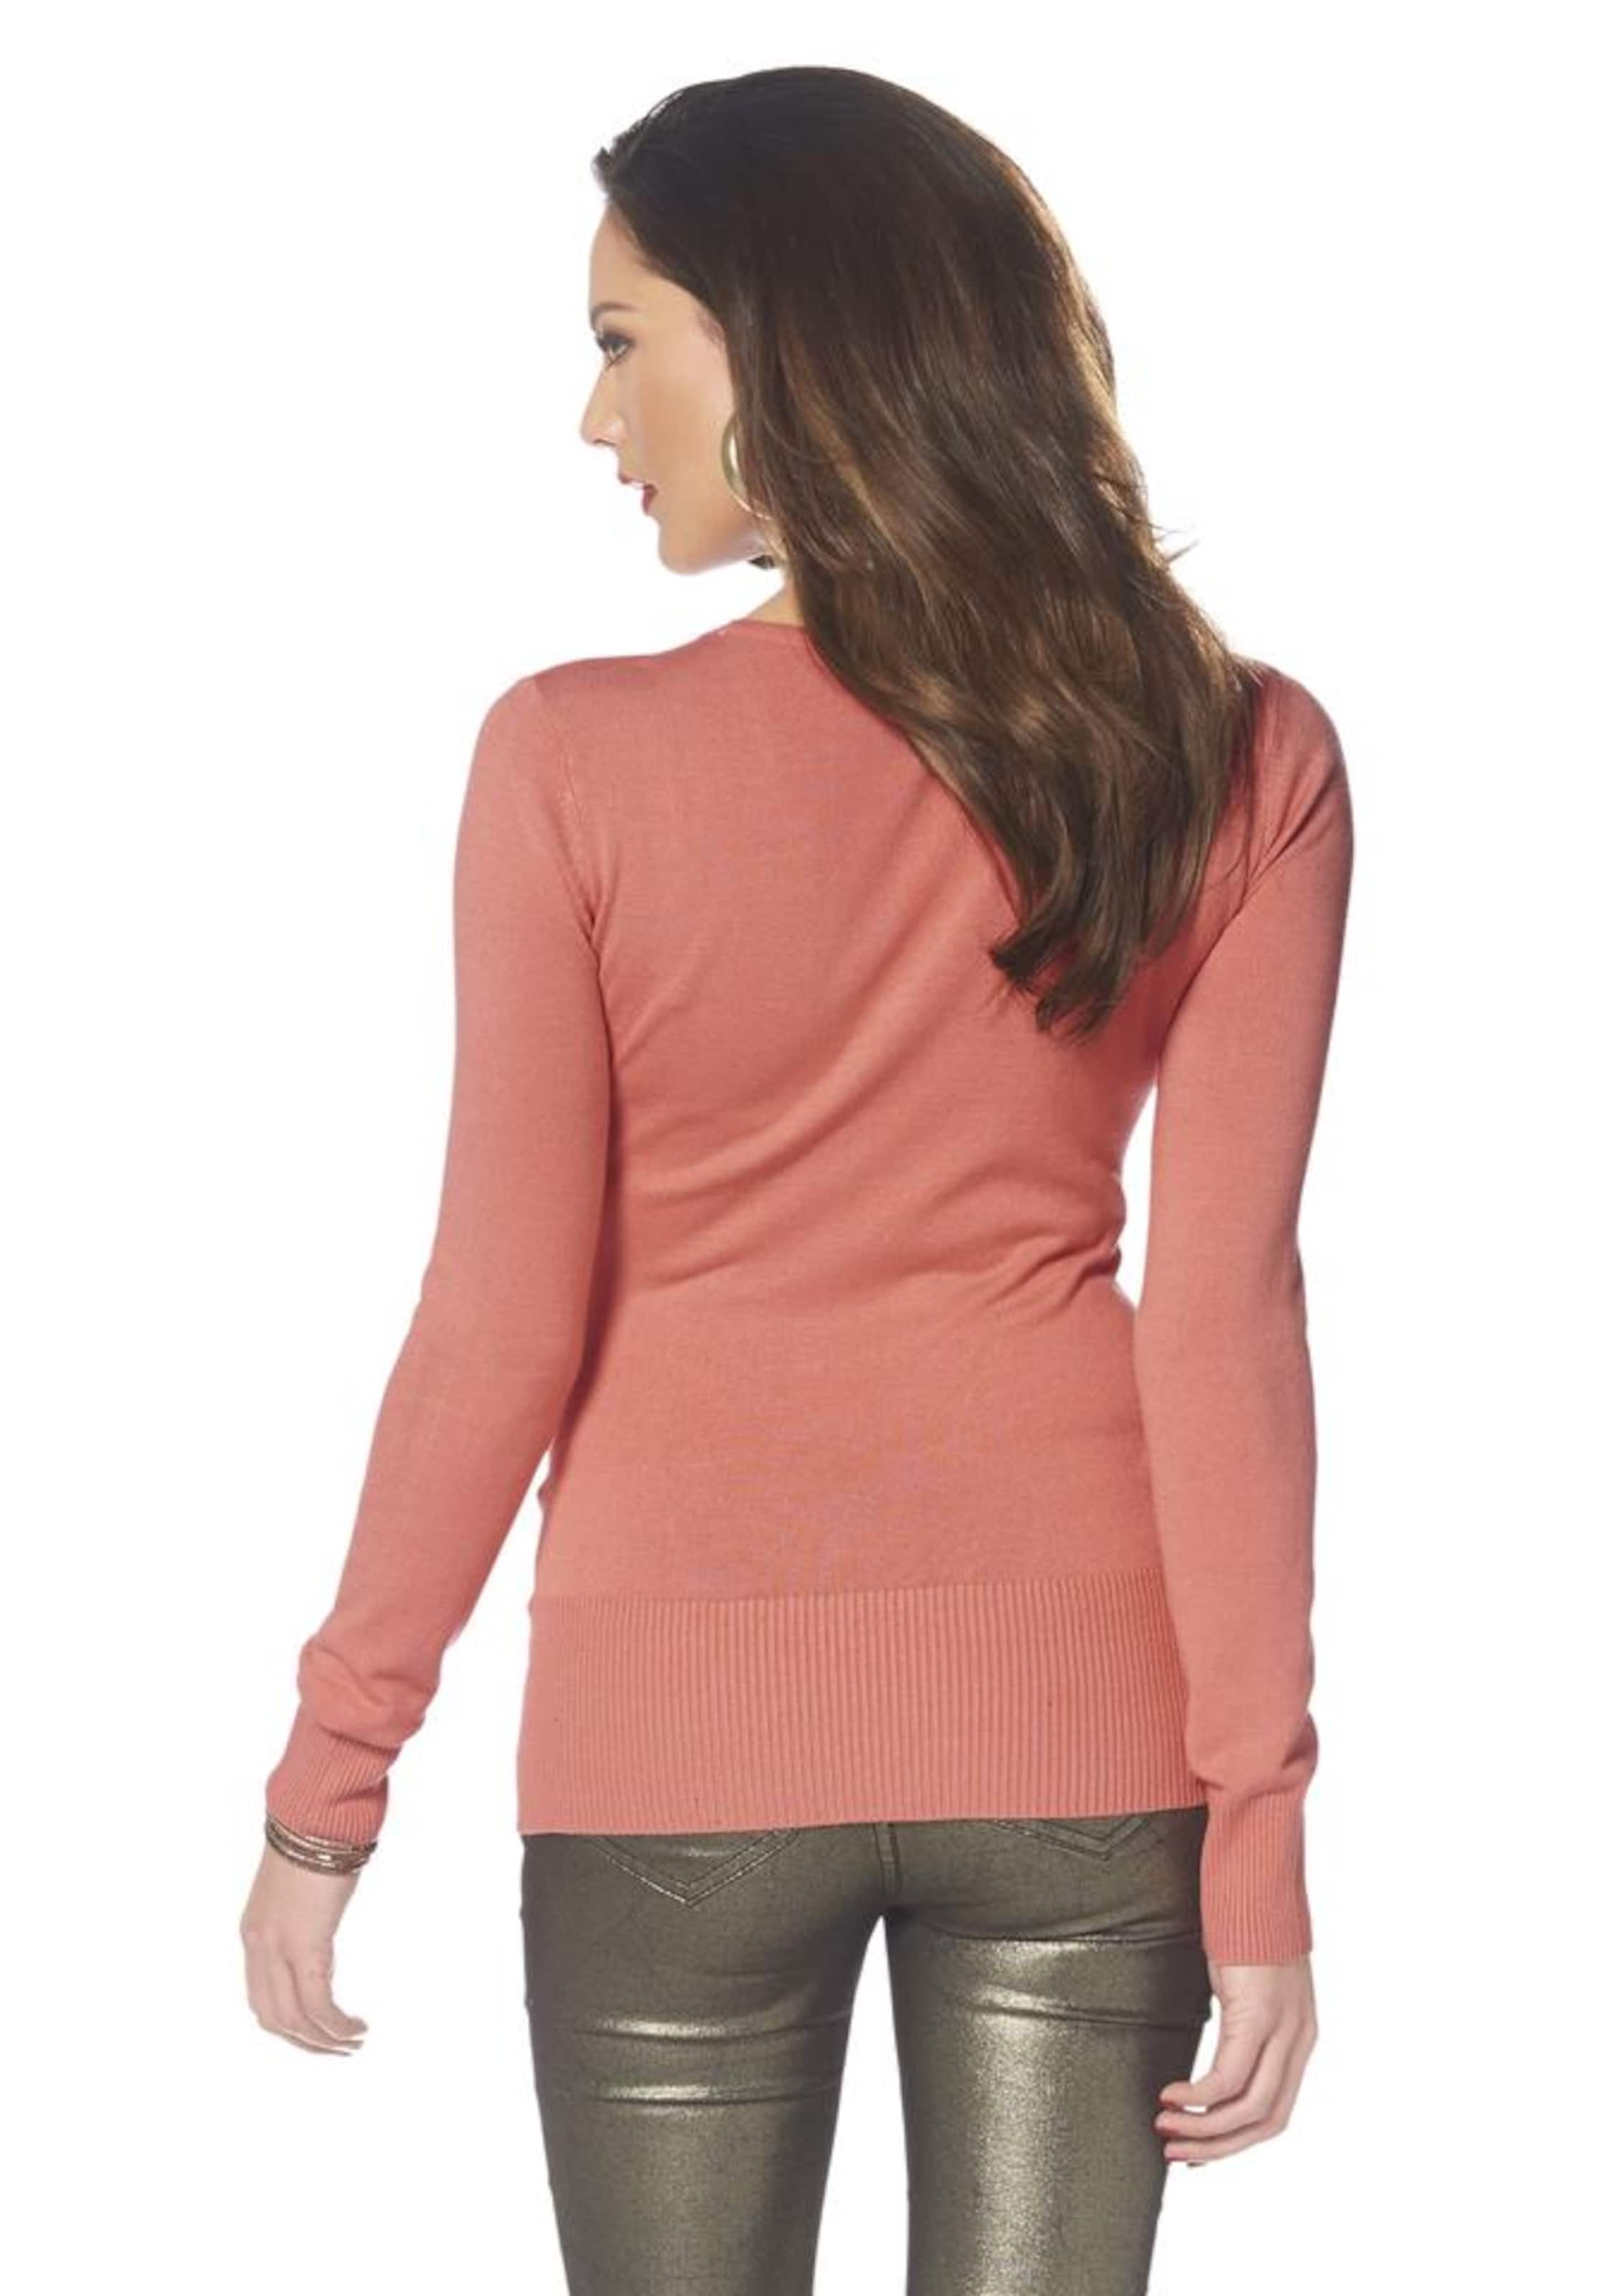 Frauen Shirts & Tops VIVANCE Pullover in Lachs - HK68917